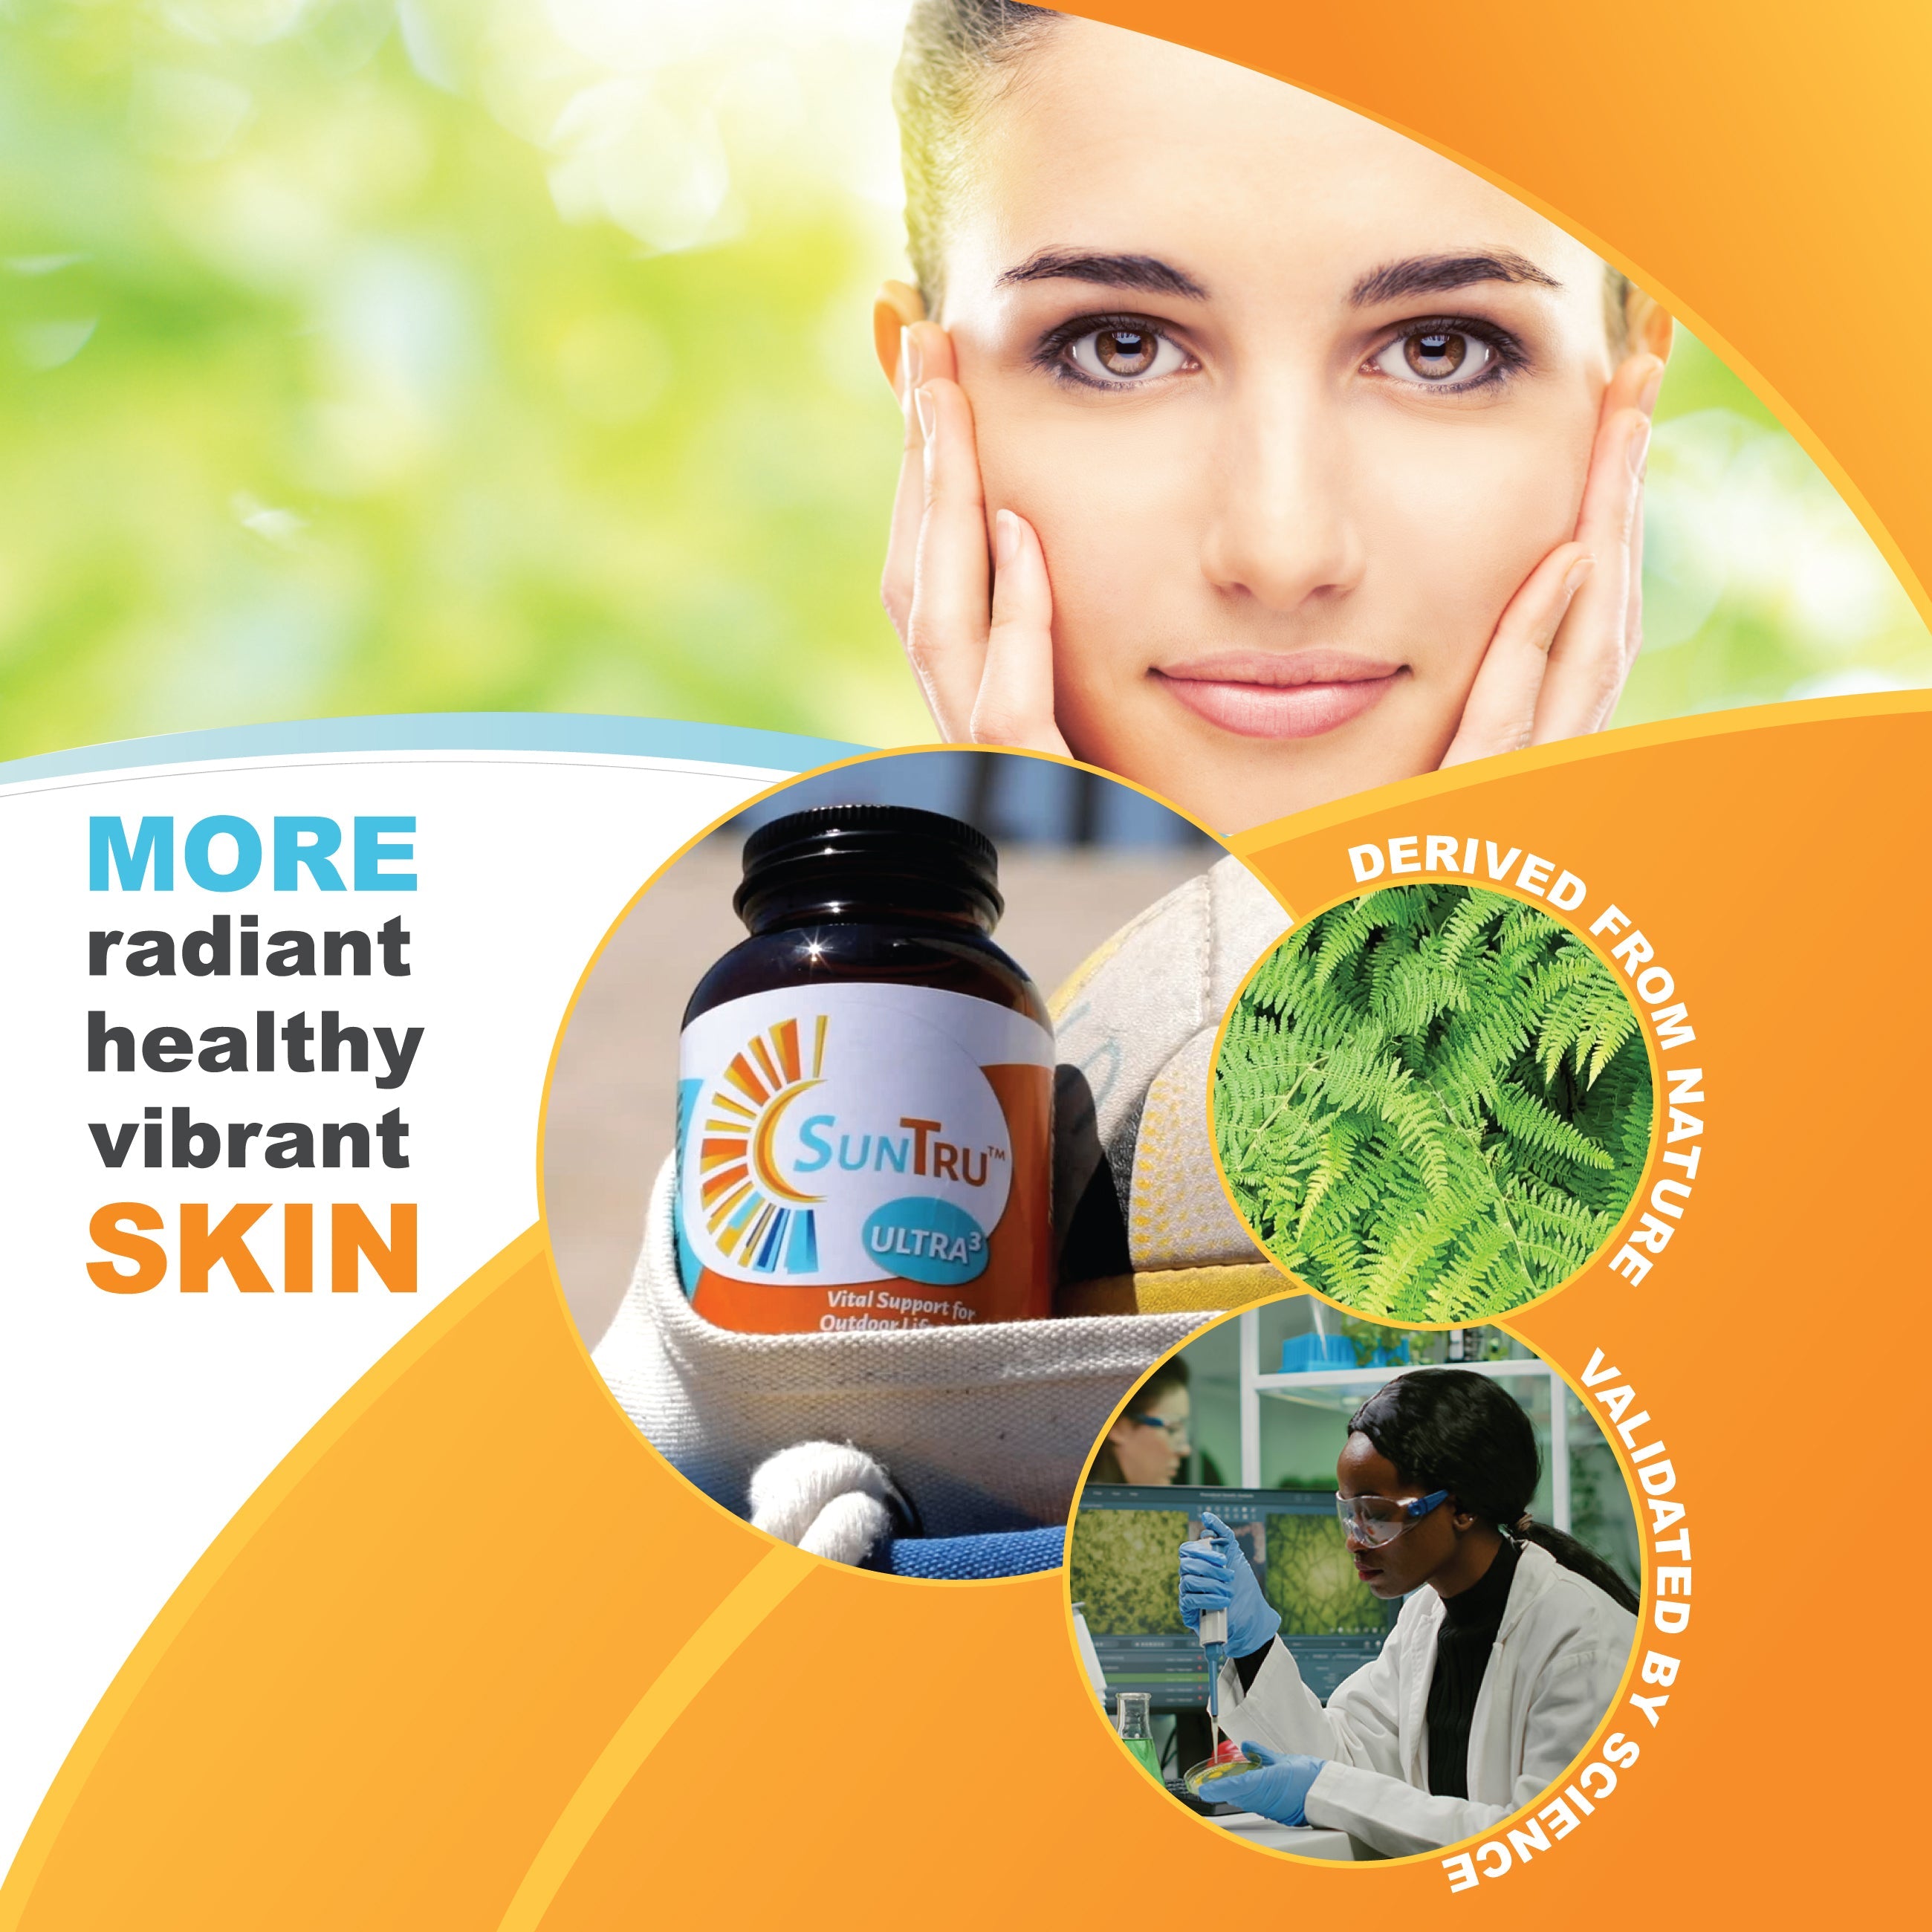 A beautiful woman is holding her face. A bottle of SunTru Ultra 3 is in a beach bag with a volleyball. A black woman scientist is in a lab testing with a microscope. Text - Derived from nature. Validated by science. MORE radiant, healthy, vibrant SKIN